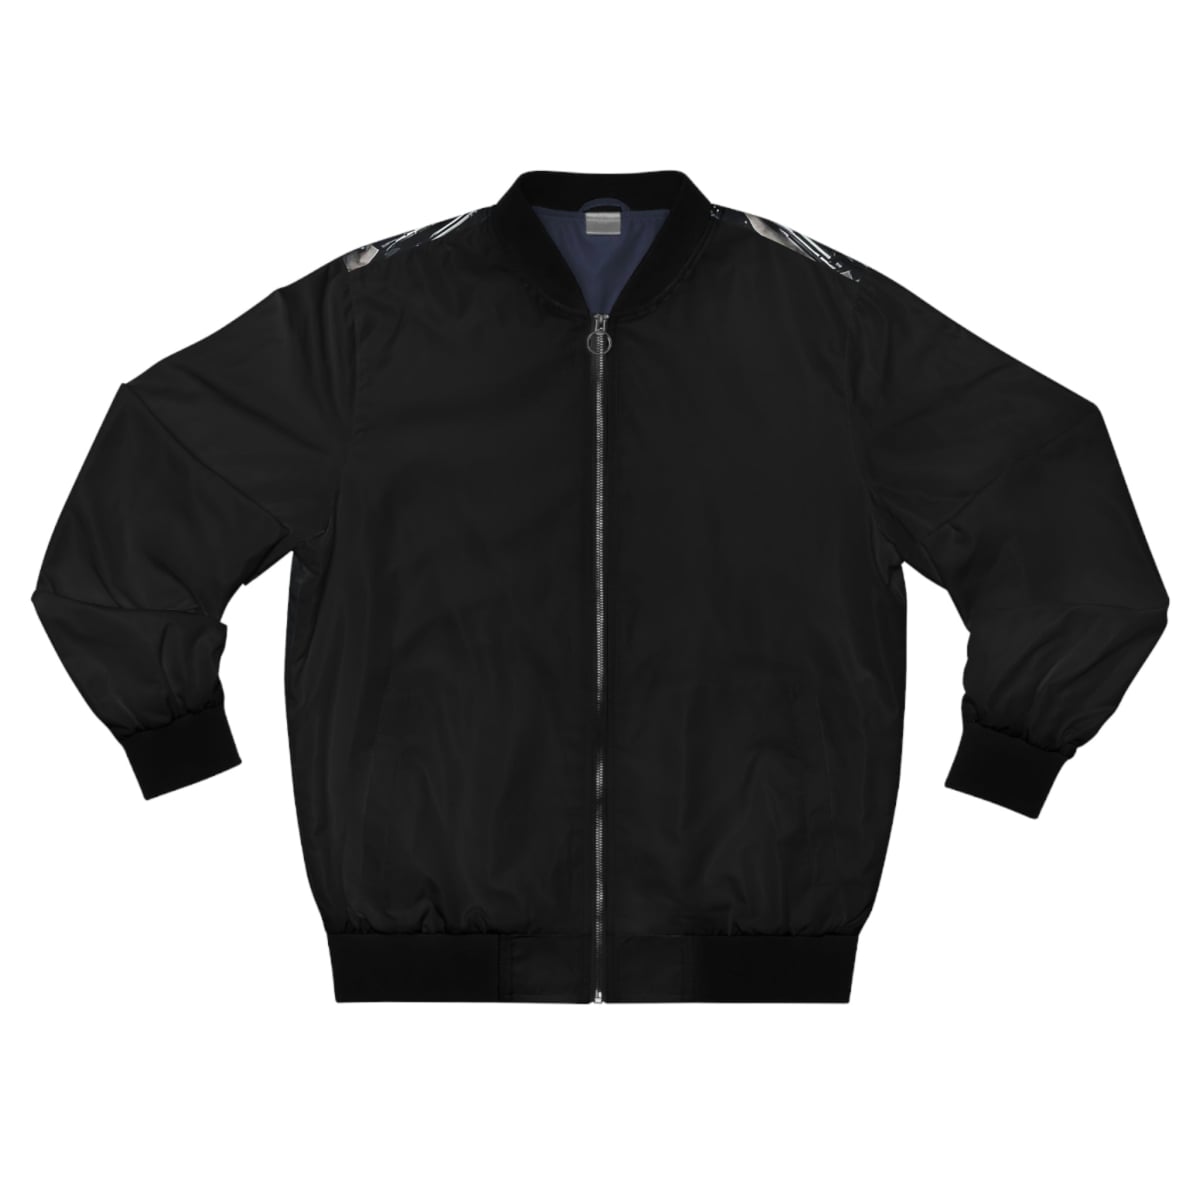 The Mob Wife Bomber Jacket